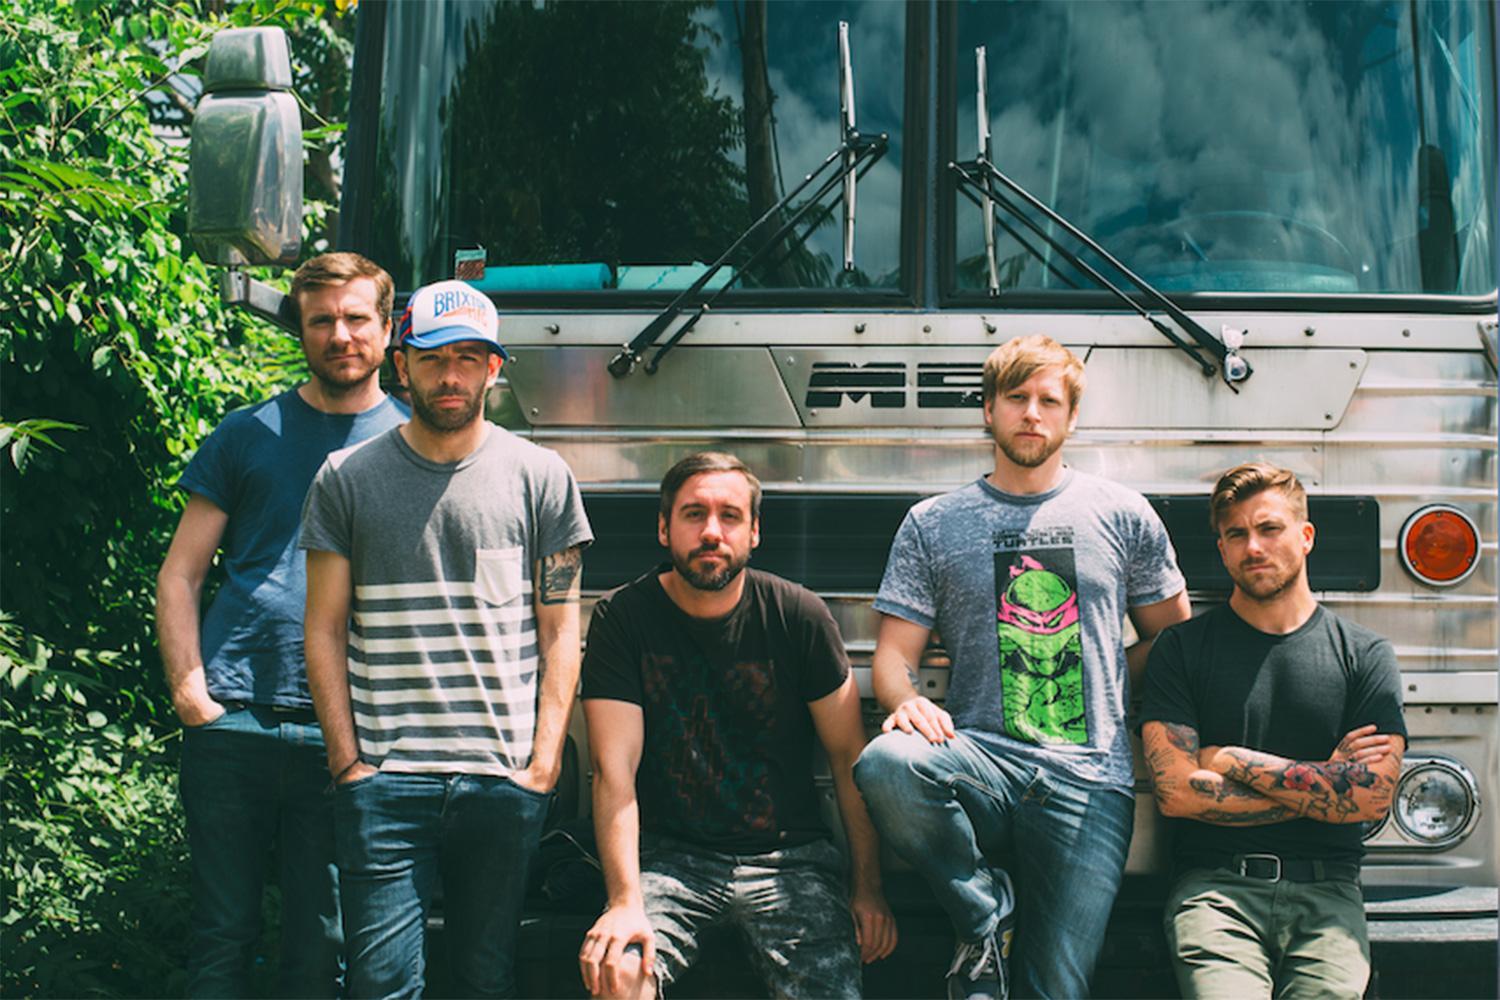 Circa Survive secure a place in modern rock history with ‘The Amulet’